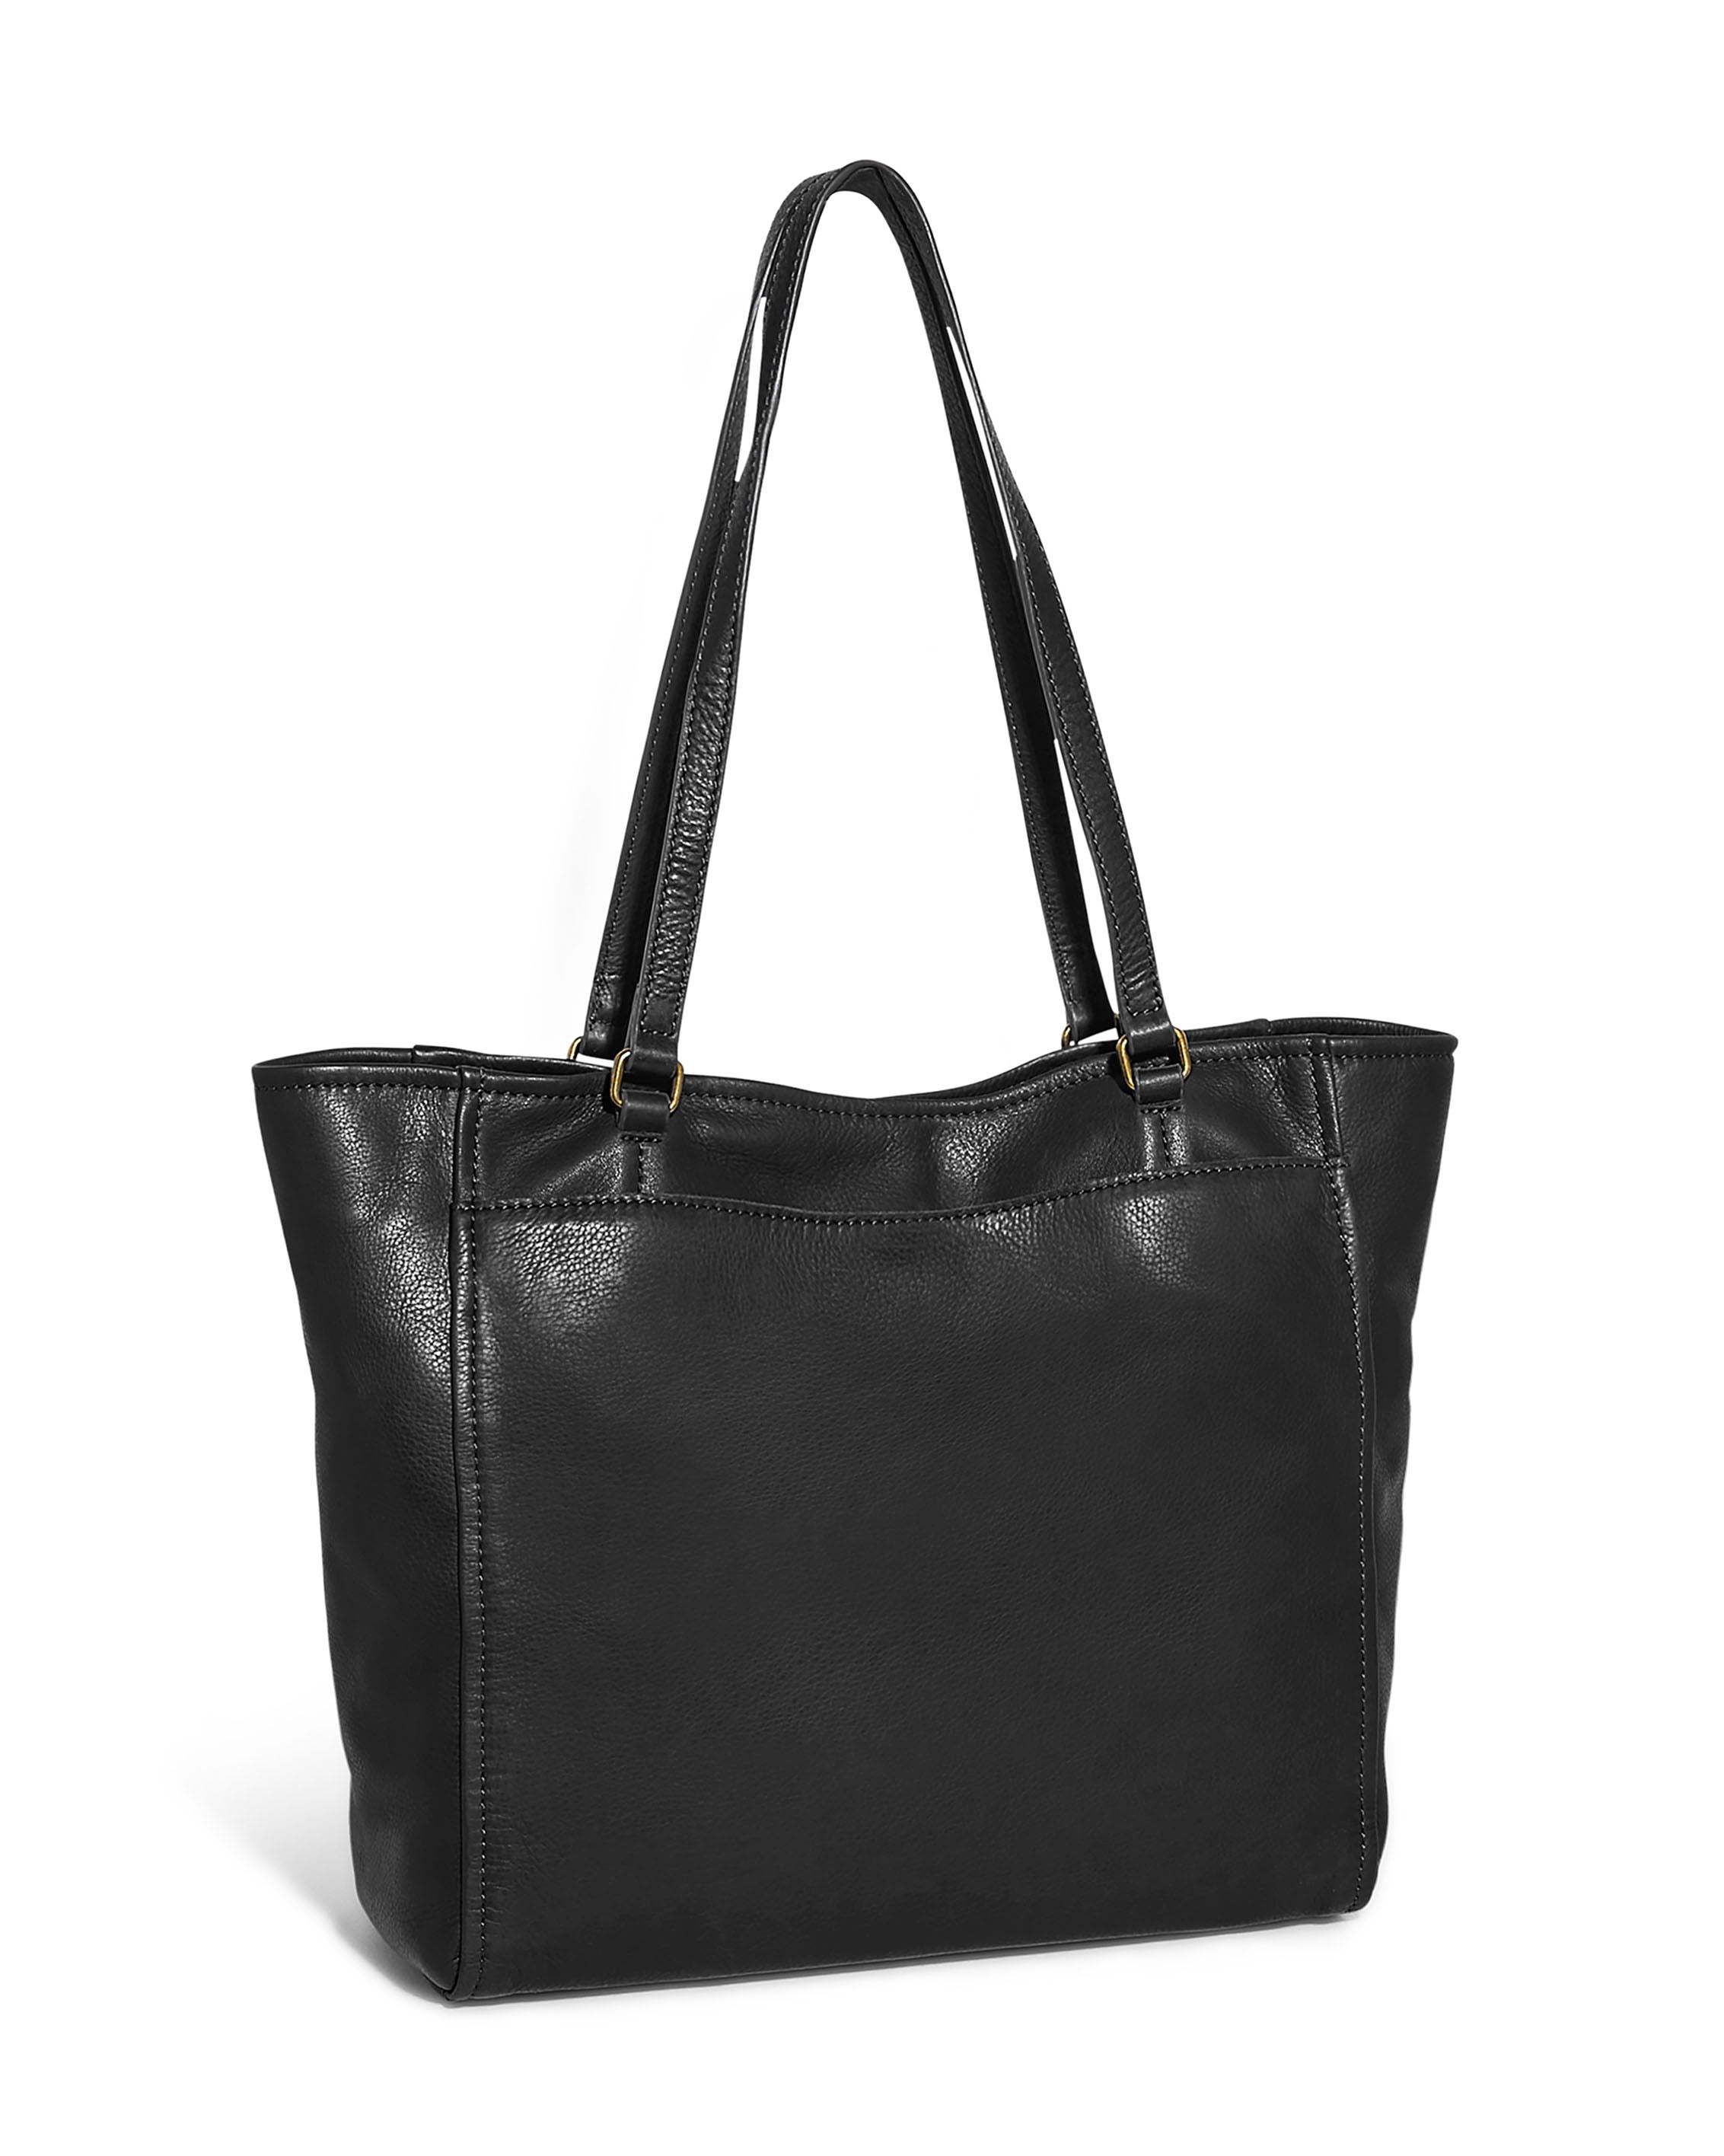 Carter Tote in Black | American Leather Co.